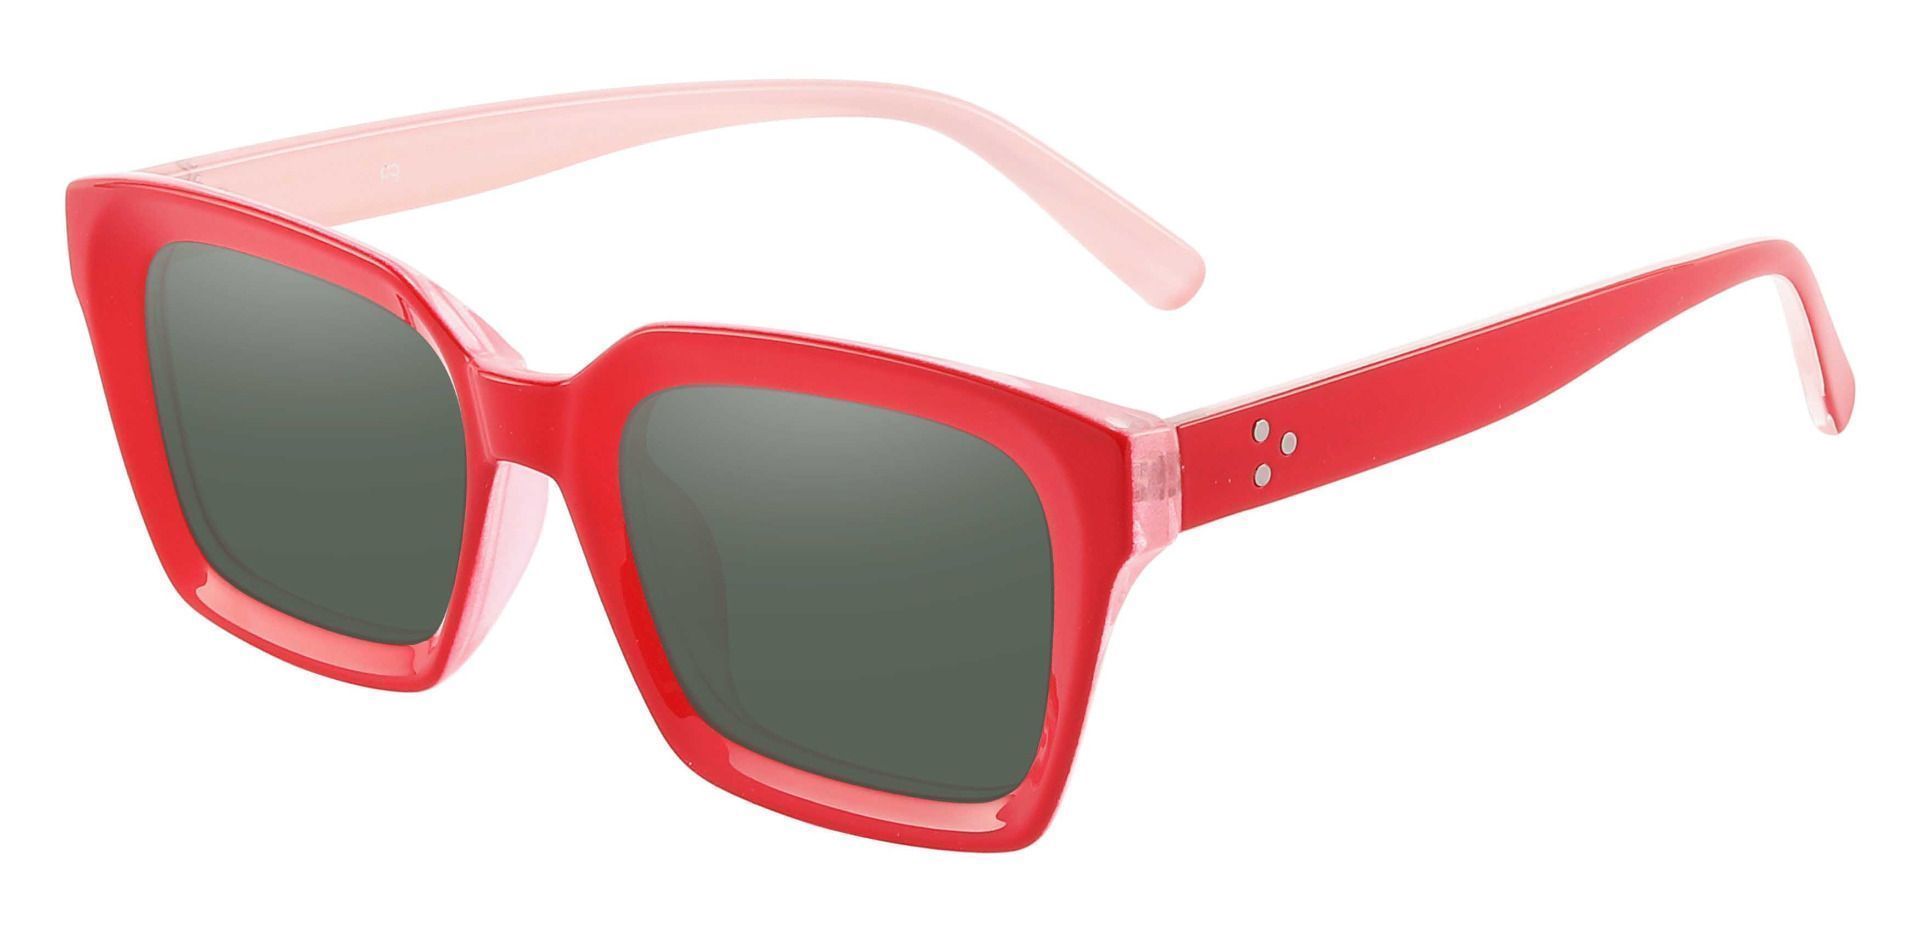 Unity Rectangle Non-Rx Sunglasses - Red Frame With Green Lenses